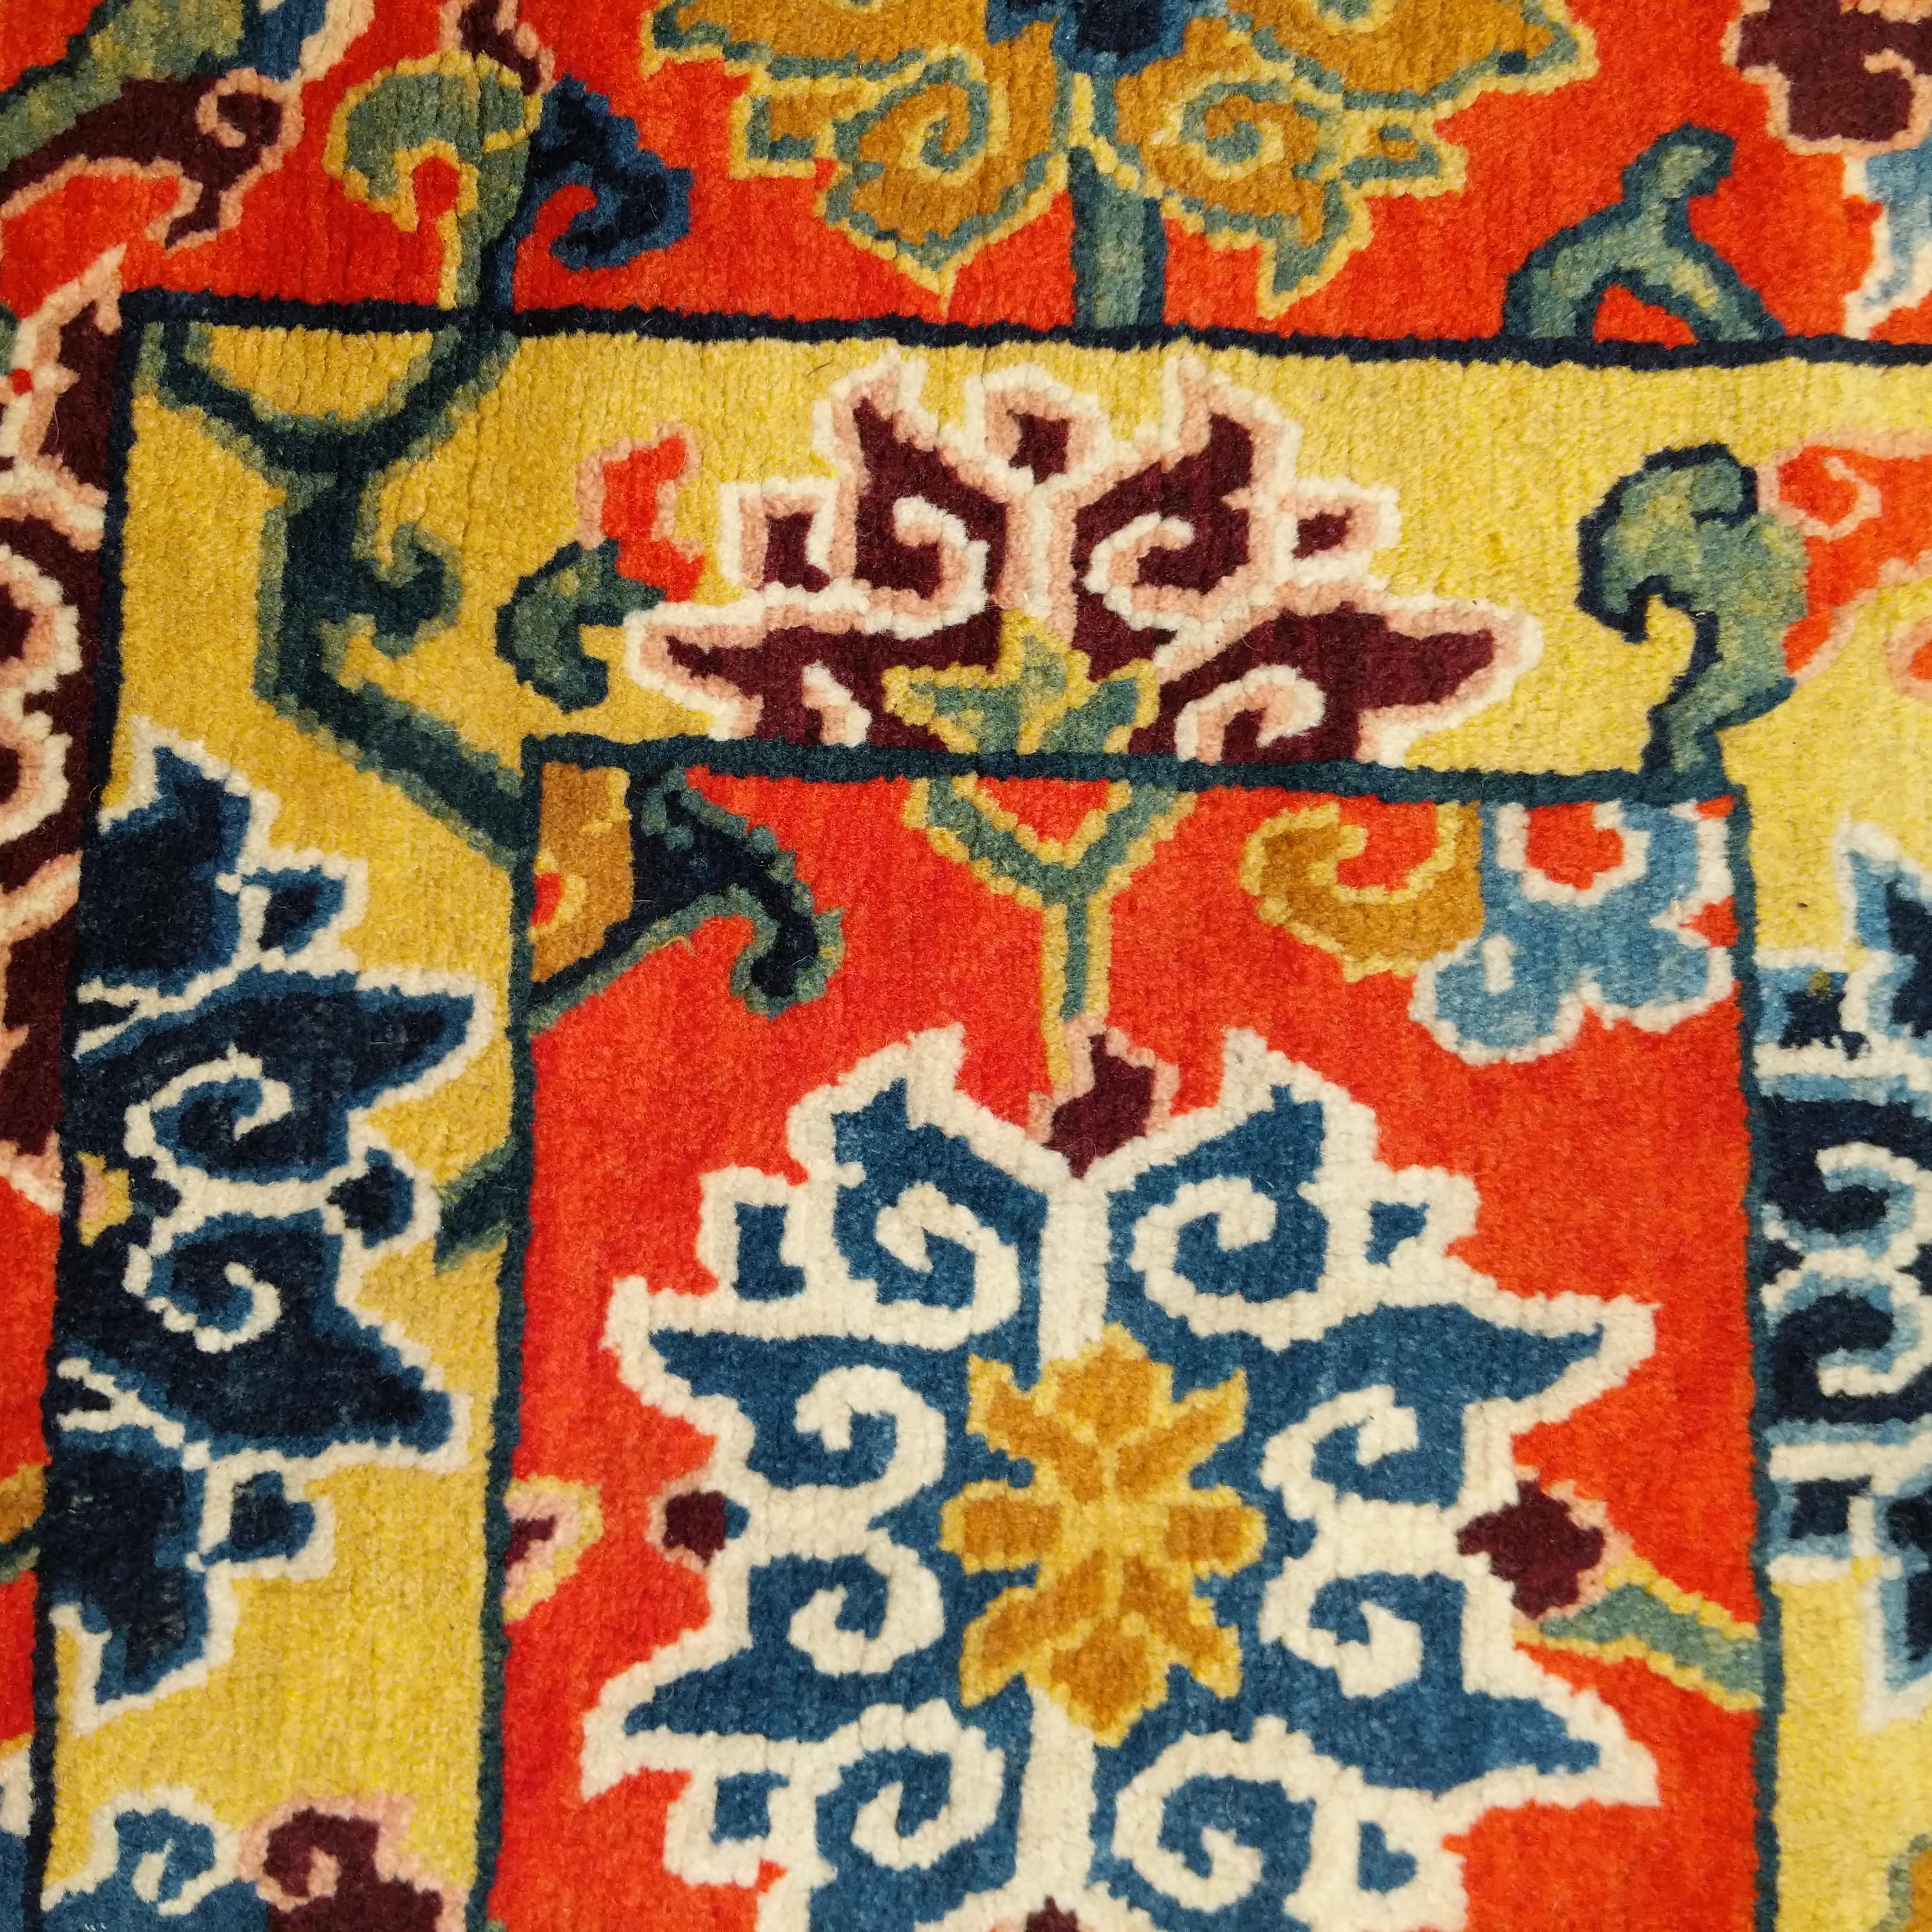 Hand-Knotted Antique Tibetan Meditation Rug for a High Lama